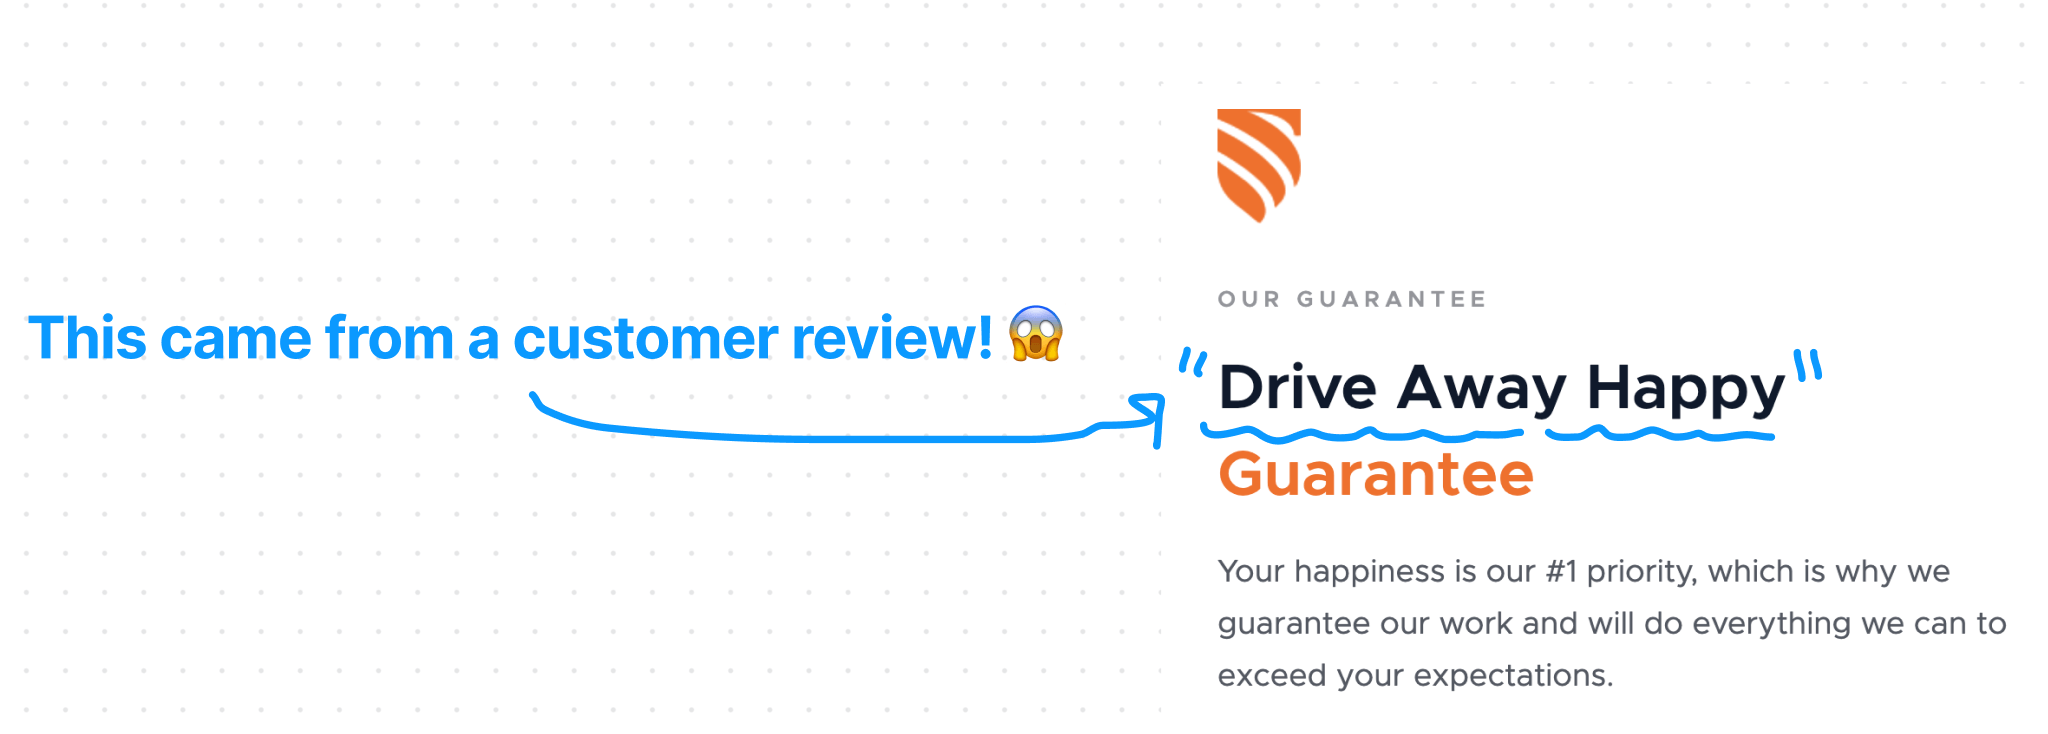 How to use customer reviews to build a website that converts